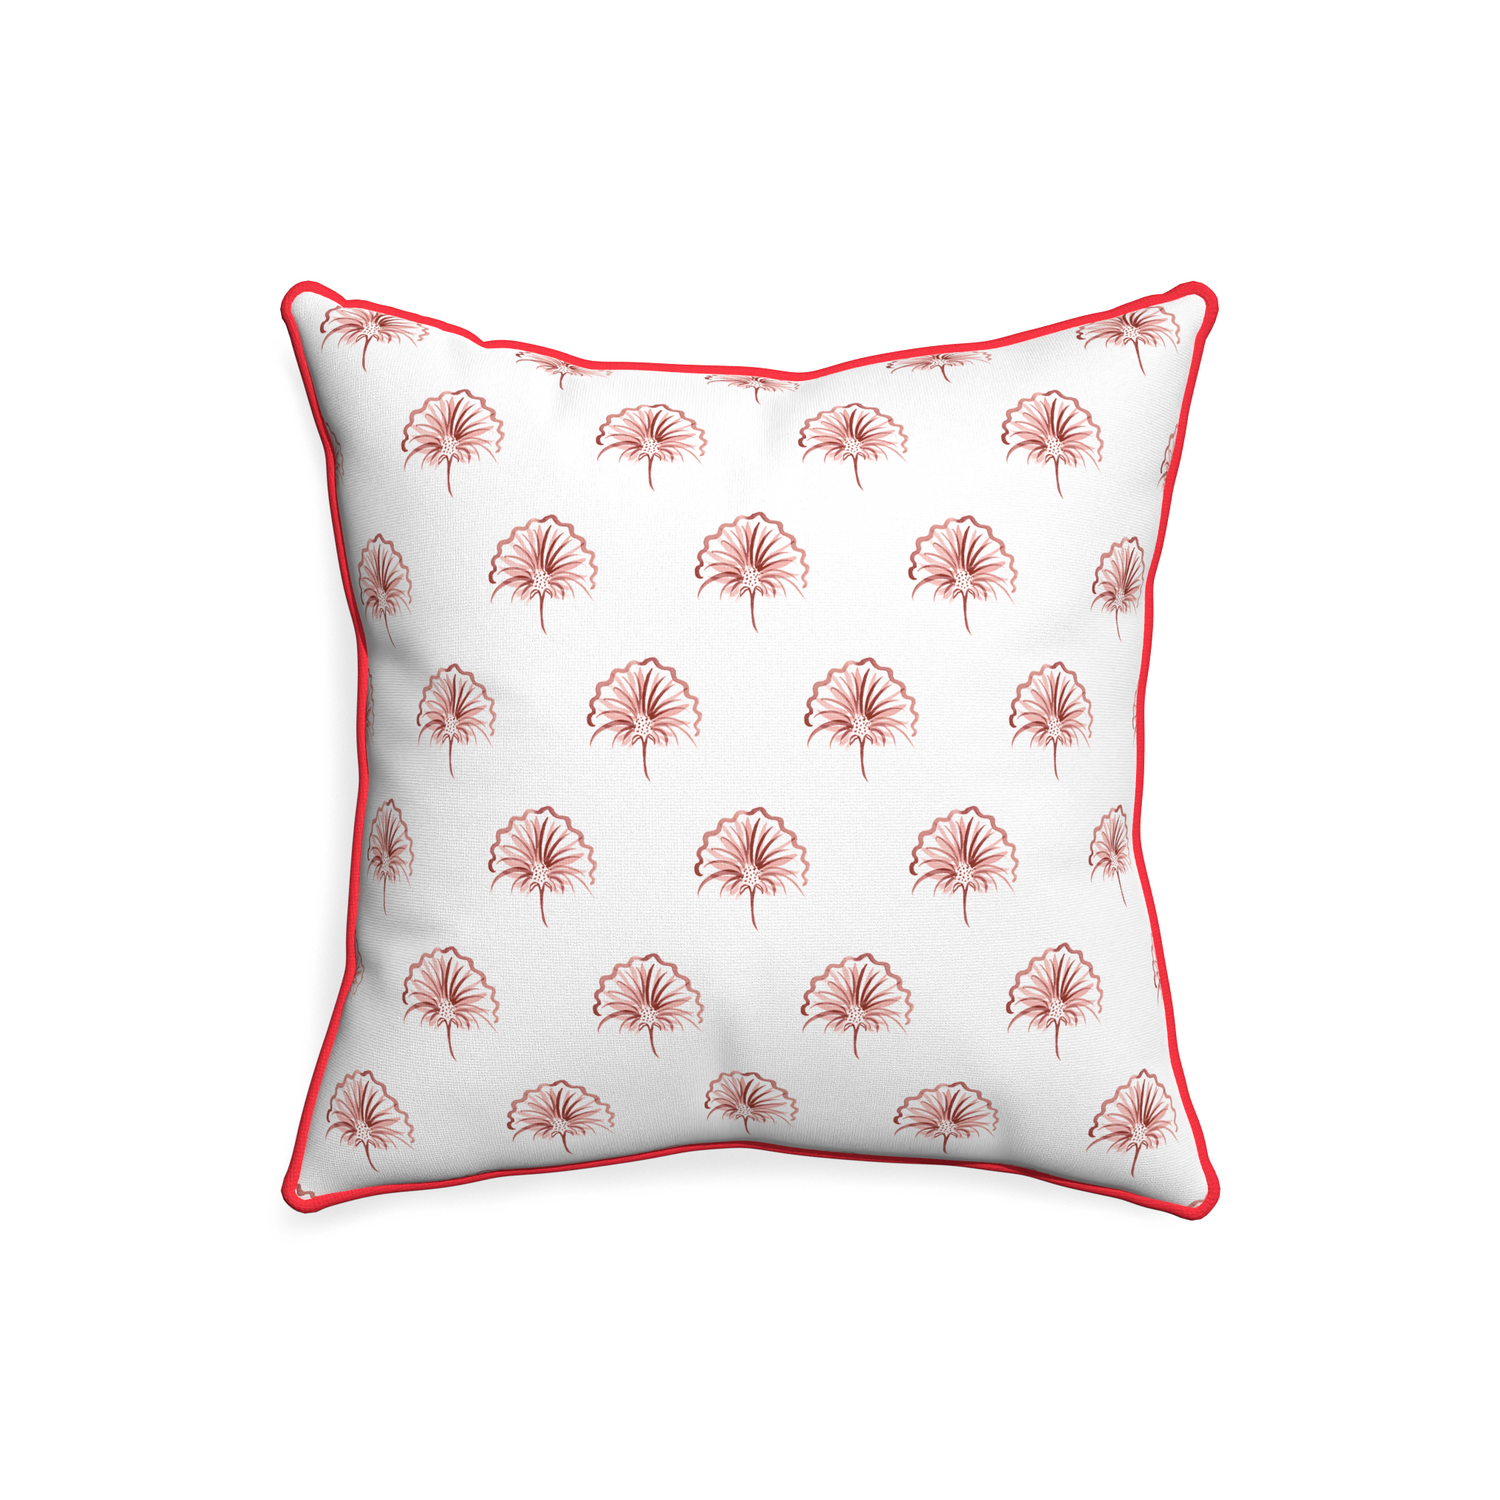 20-square penelope rose custom pillow with cherry piping on white background